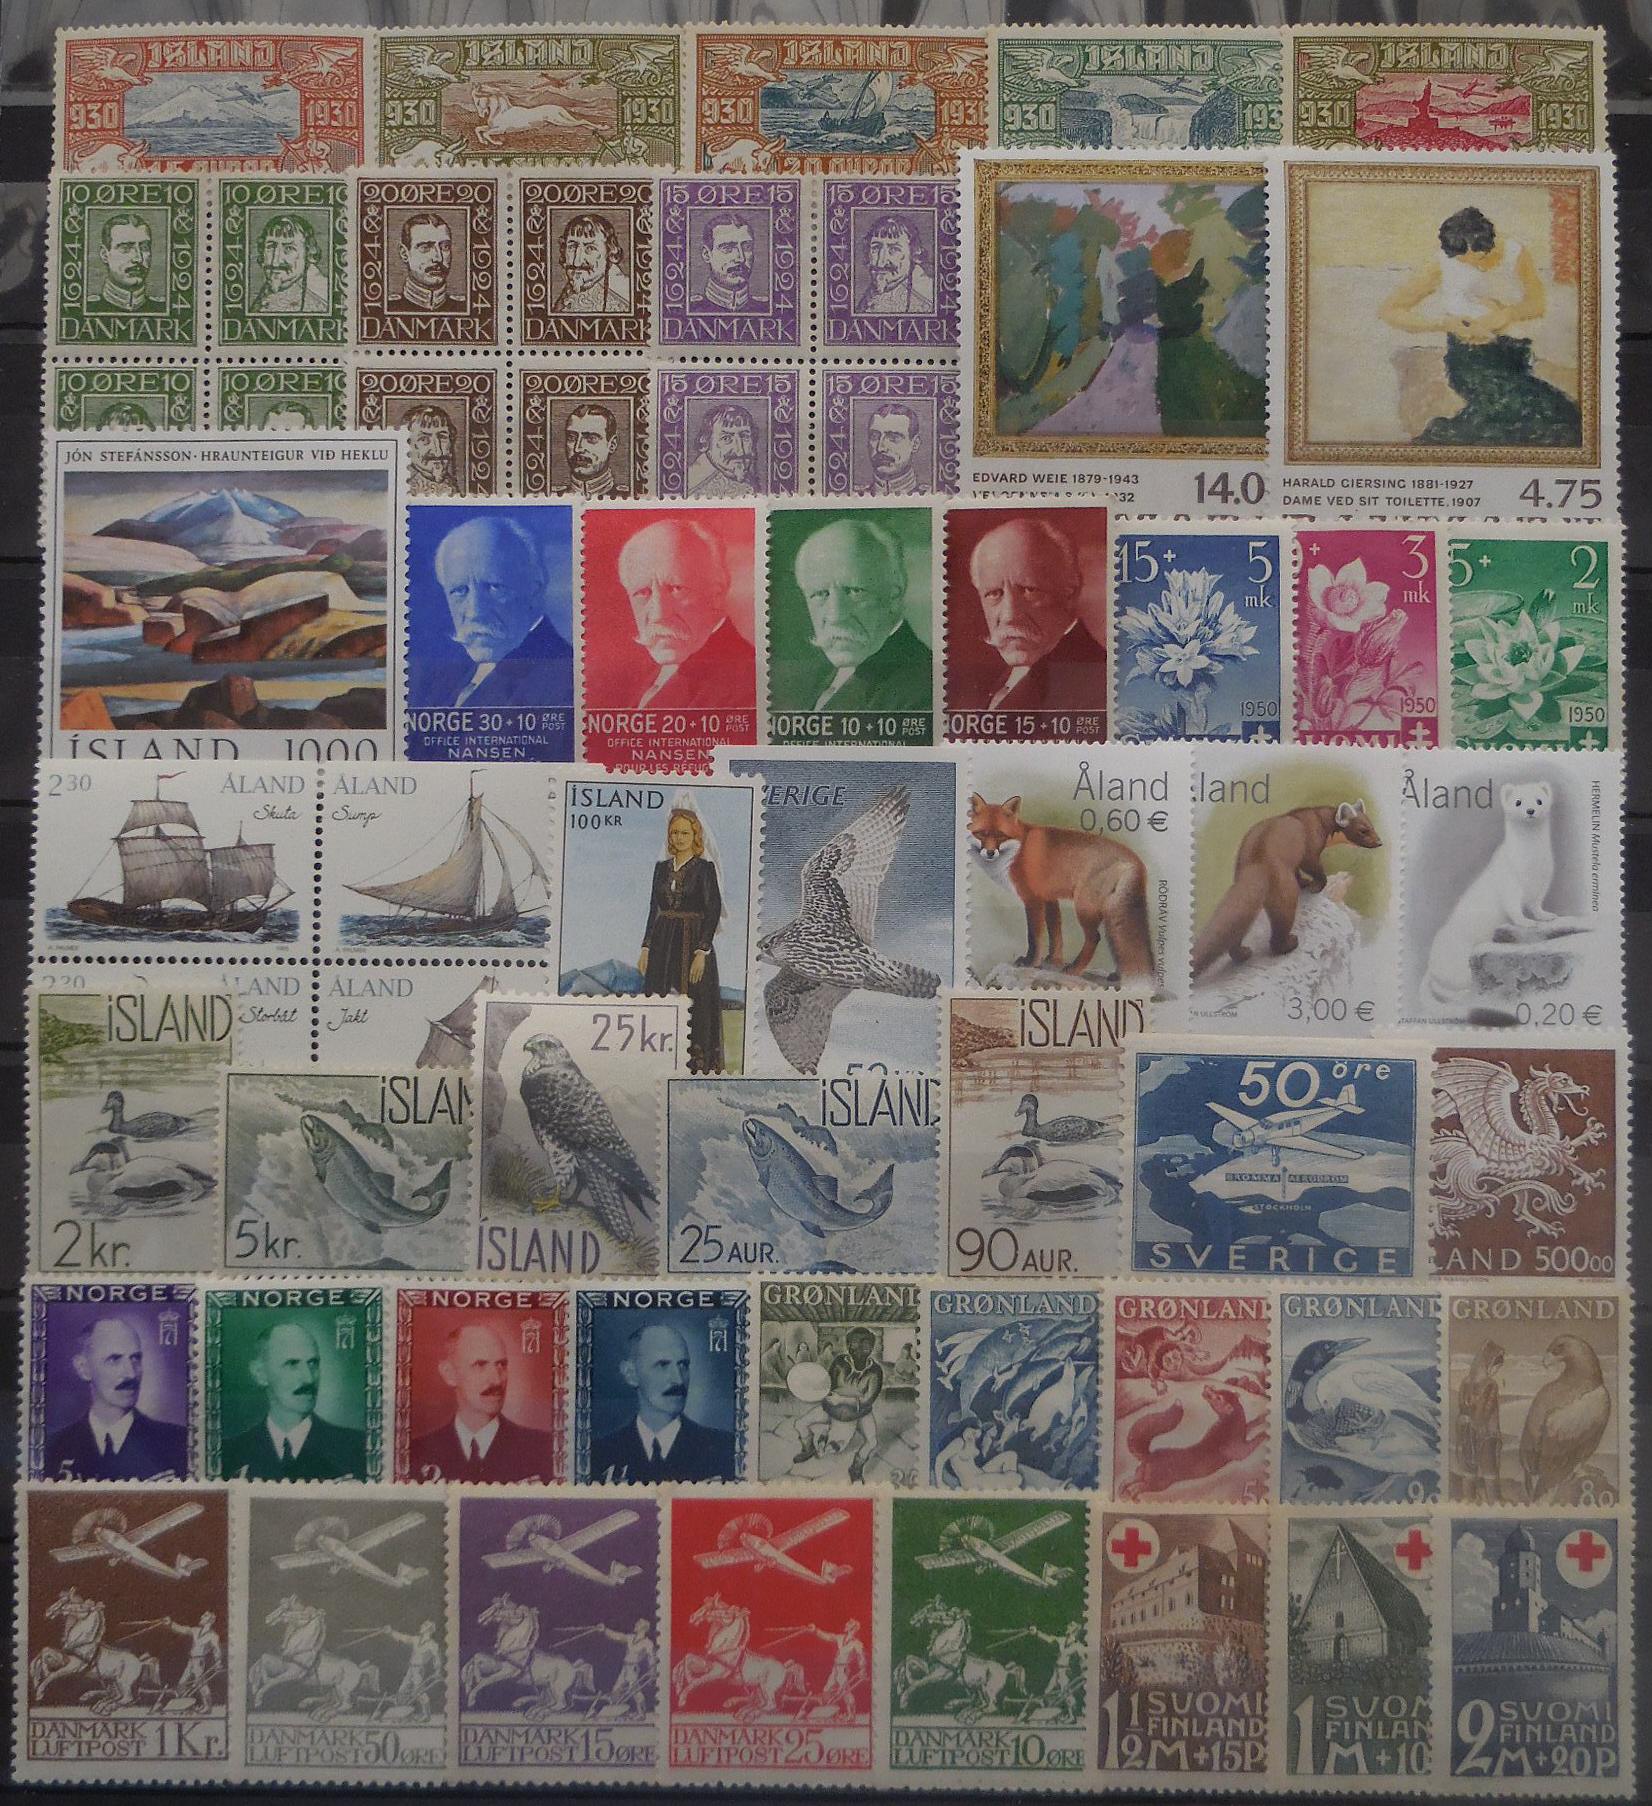 Scandinavian stamps for collectors on approval